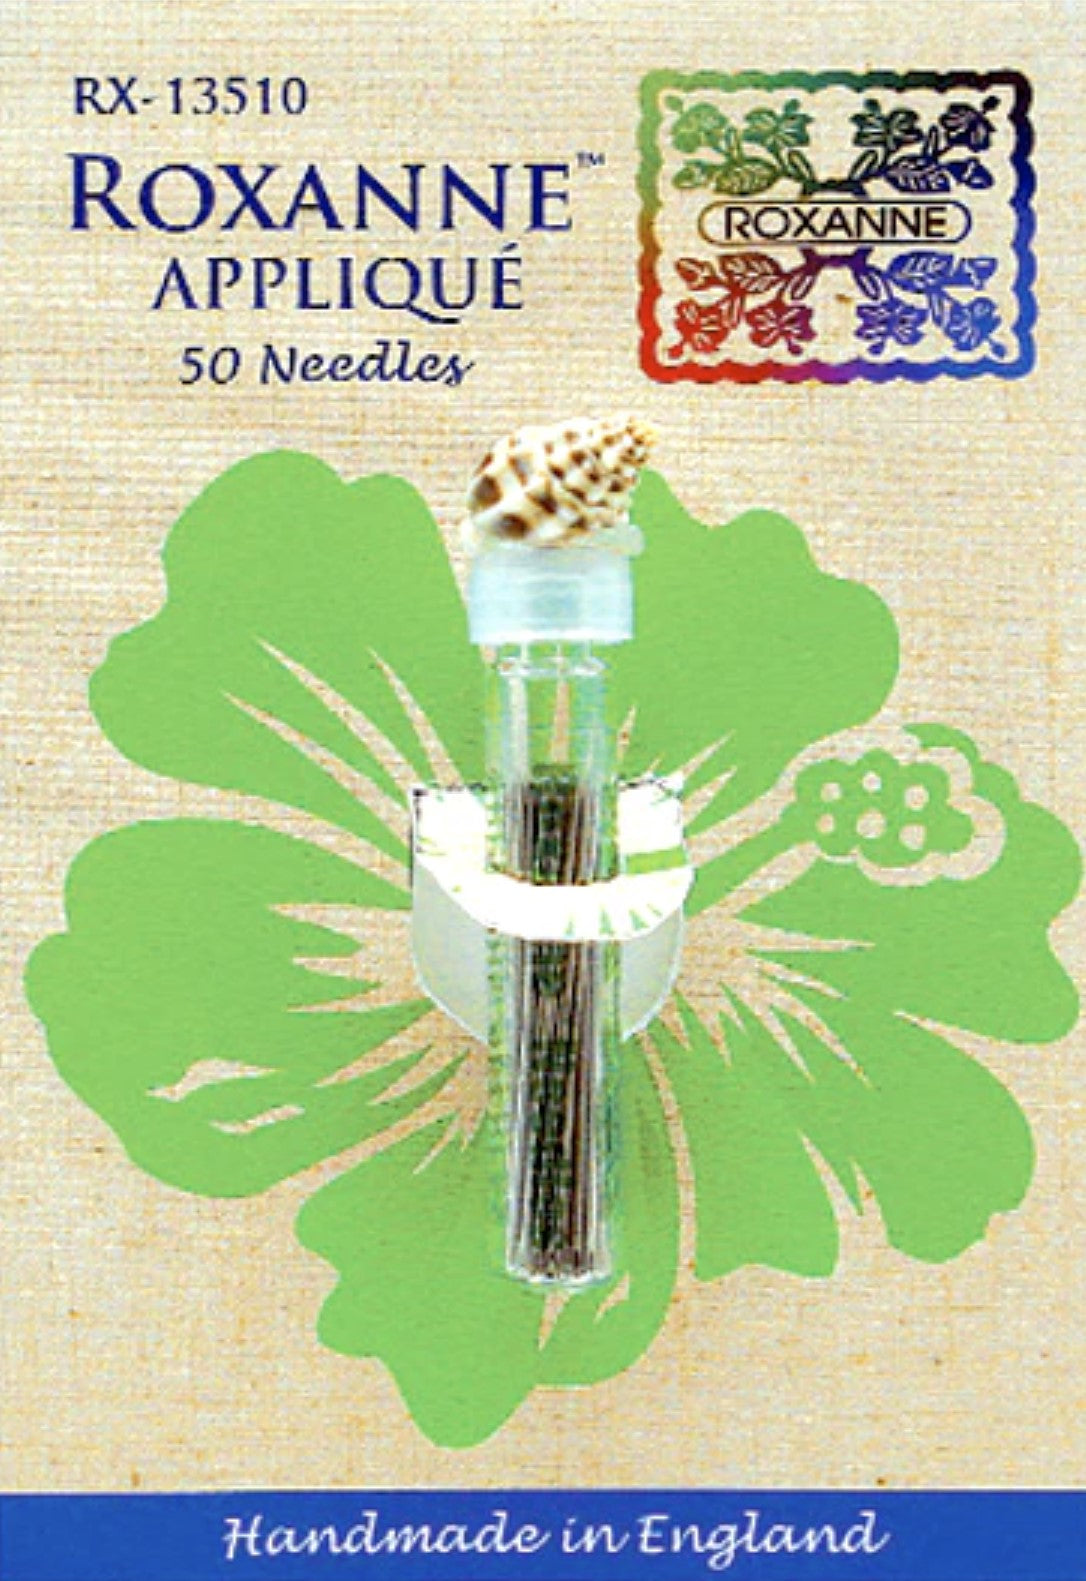 Appliqué -- Large Eye -- Ref. RX-13510 -- Hand Sewing Needles by Roxanne®